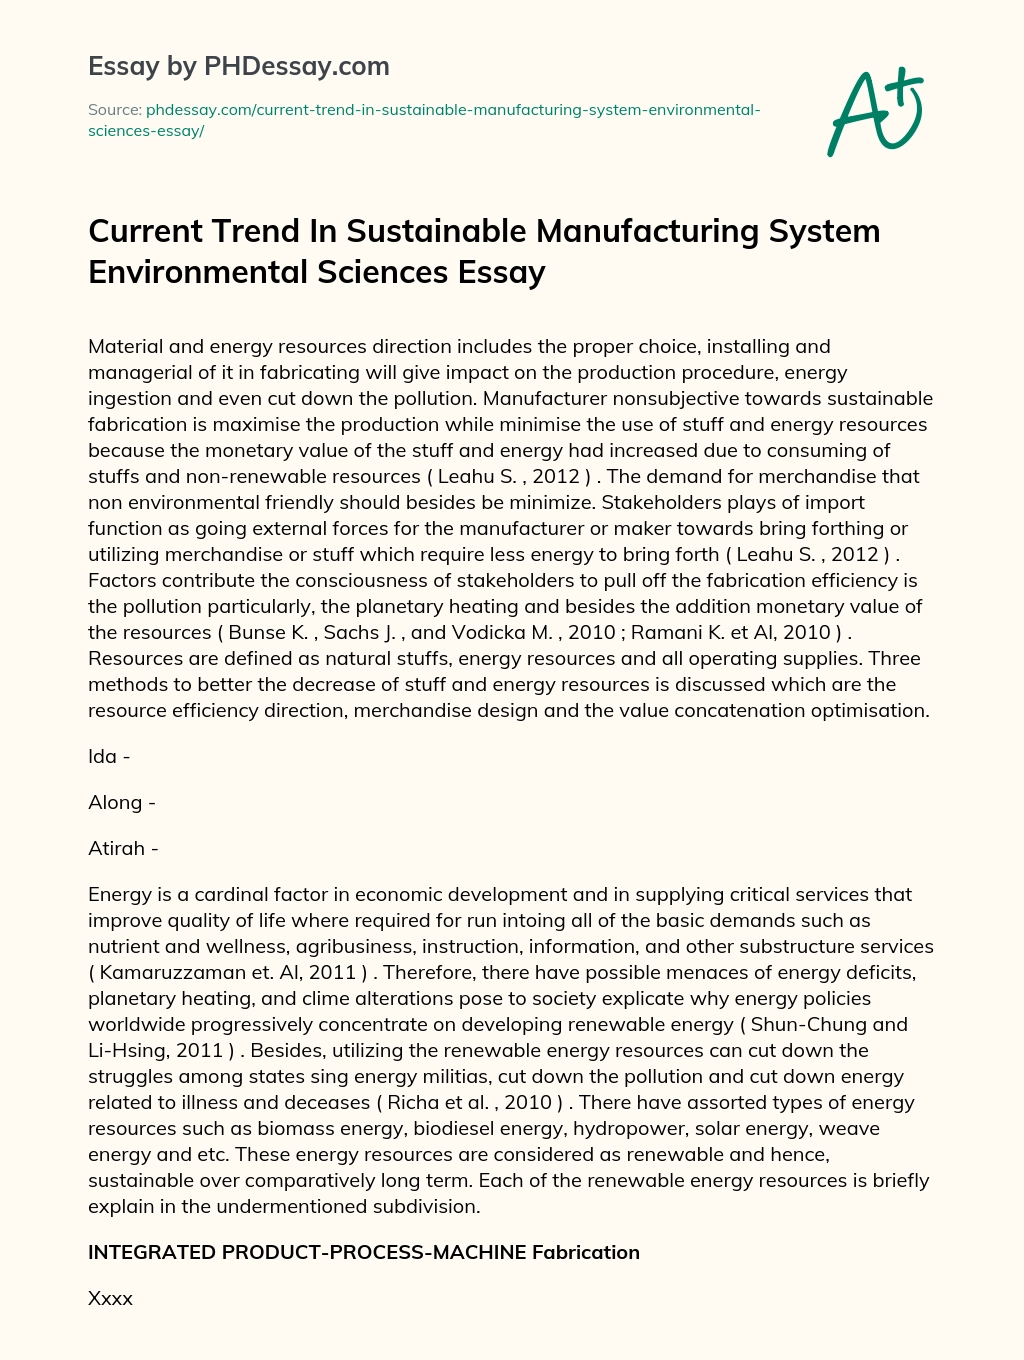 Current Trend In Sustainable Manufacturing System Environmental Sciences Essay essay